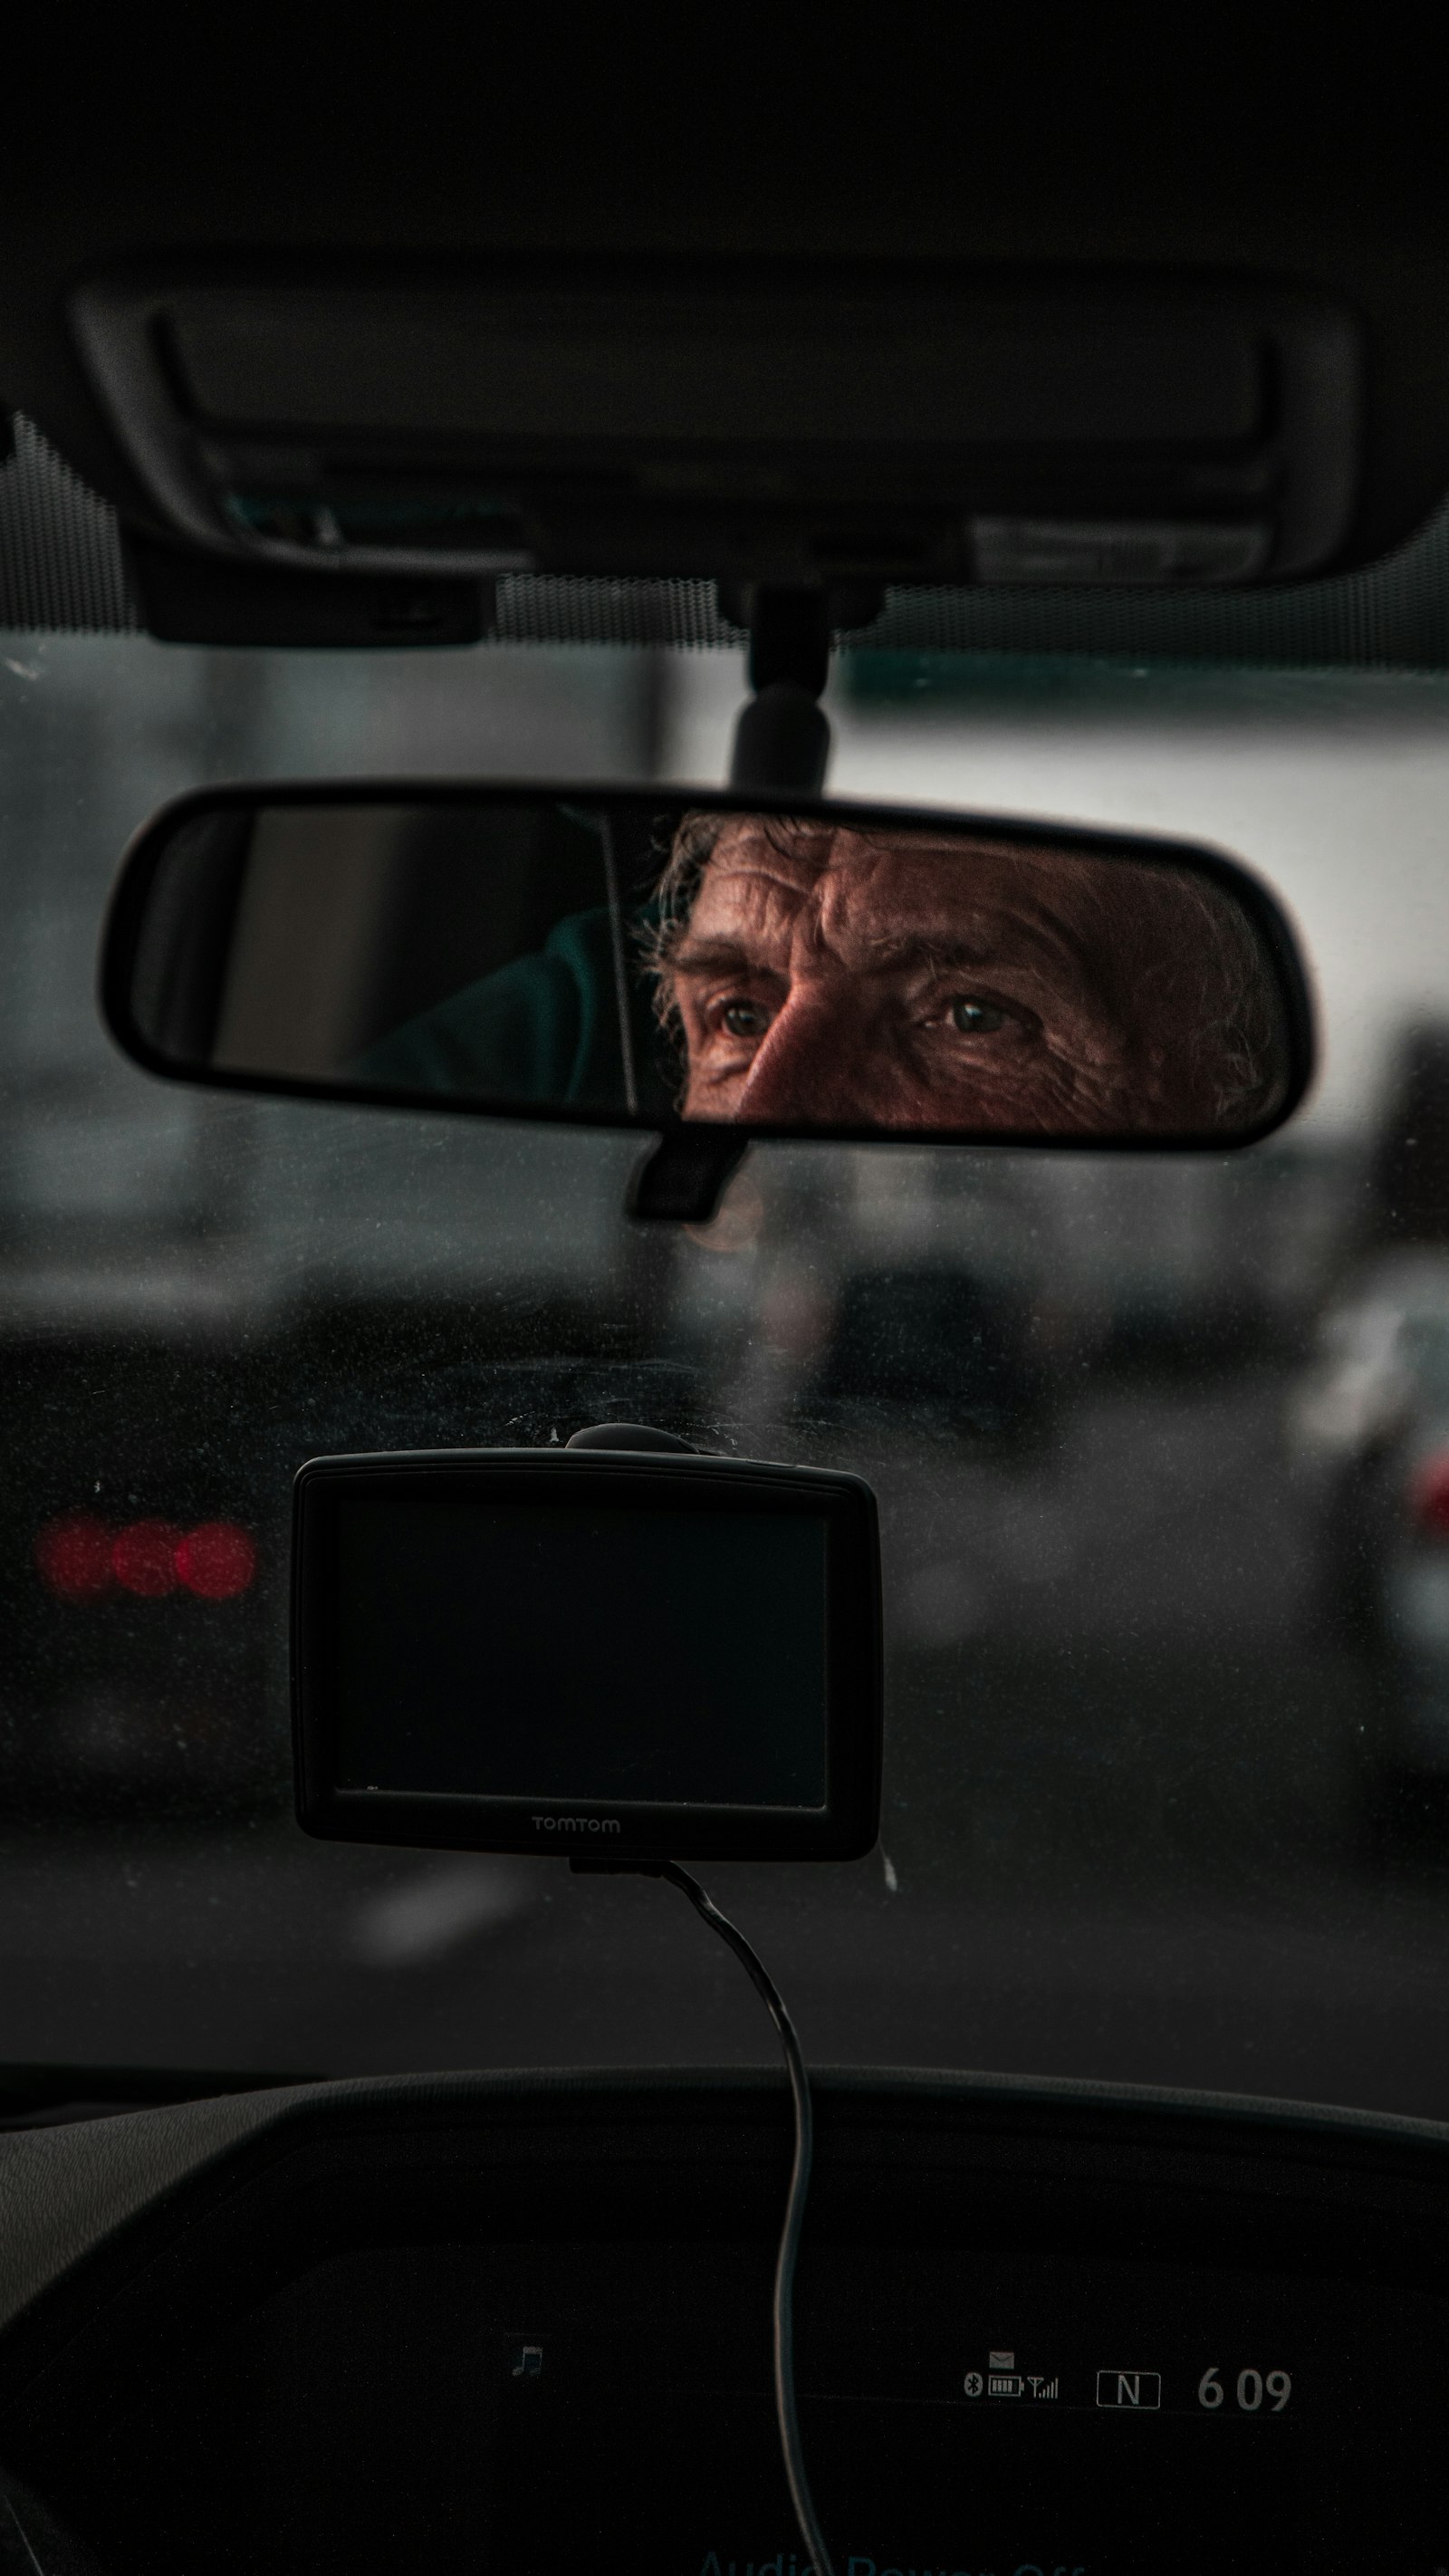 Sony a6300 + Tamron 18-270mm F3.5-6.3 Di II PZD sample photo. Rear view mirror with photography